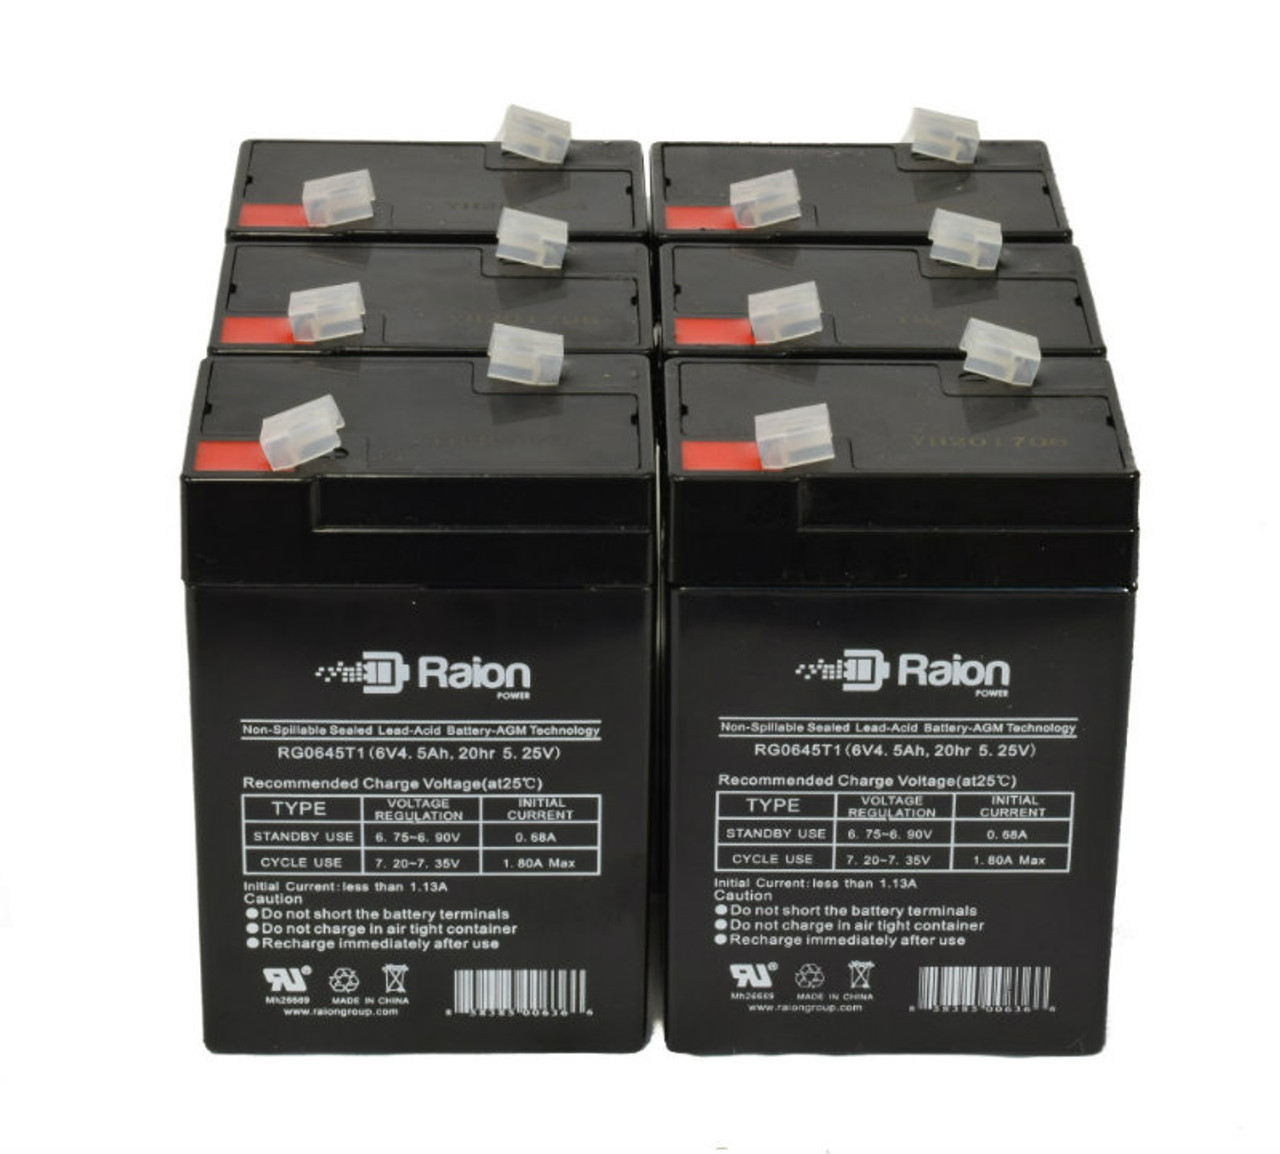 Raion Power 6 Volt 4.5Ah RG0645T1 Replacement Battery for Kaiying KS4-6BZ - 6 Pack